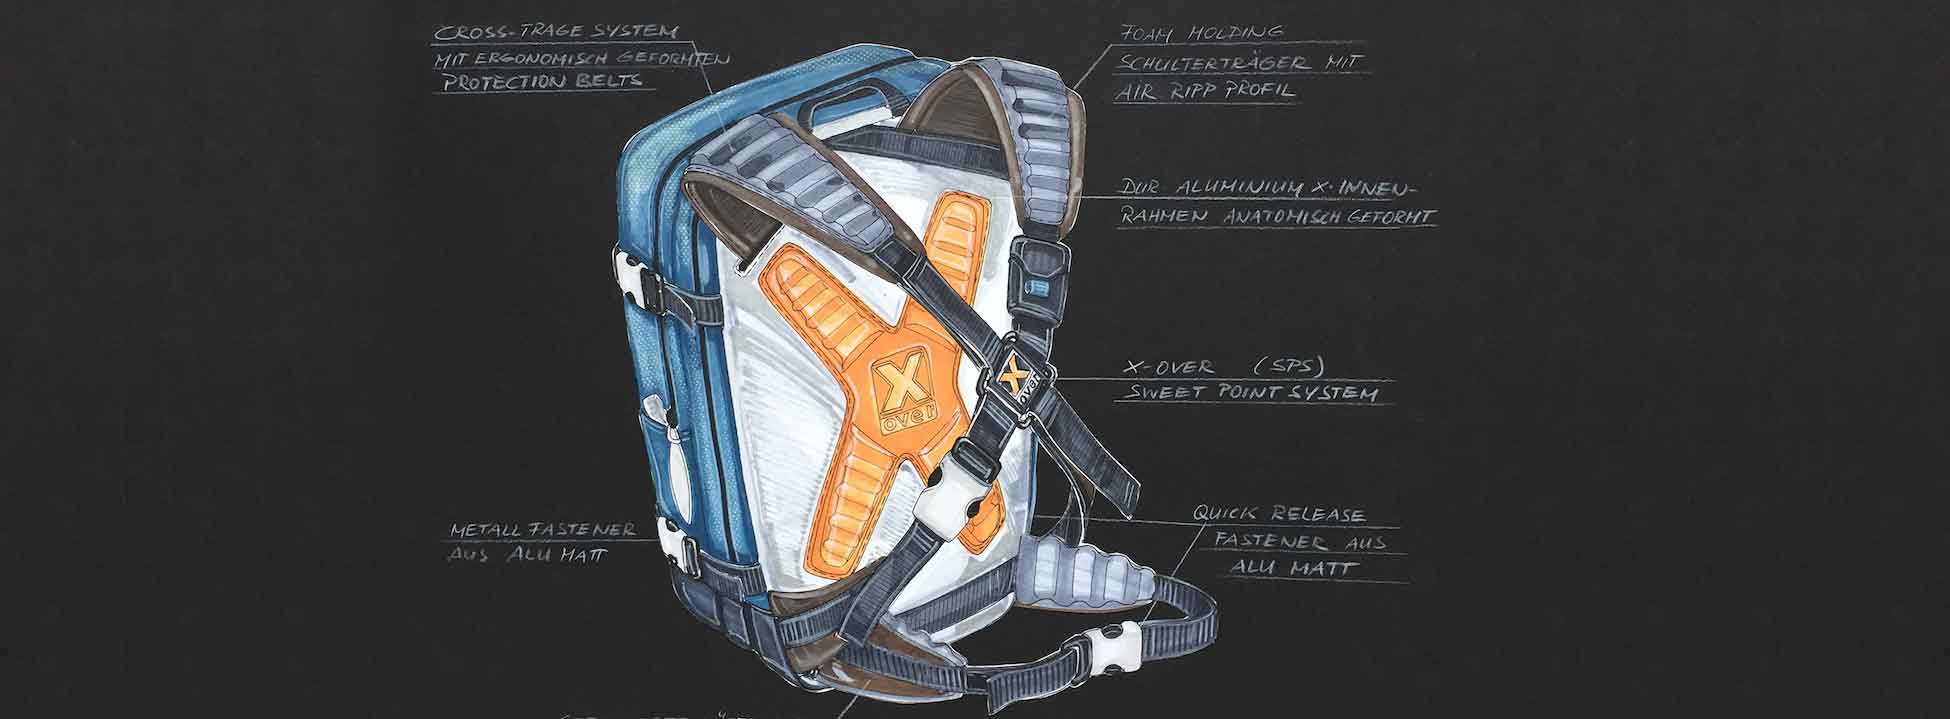 X-over bag early development sketch